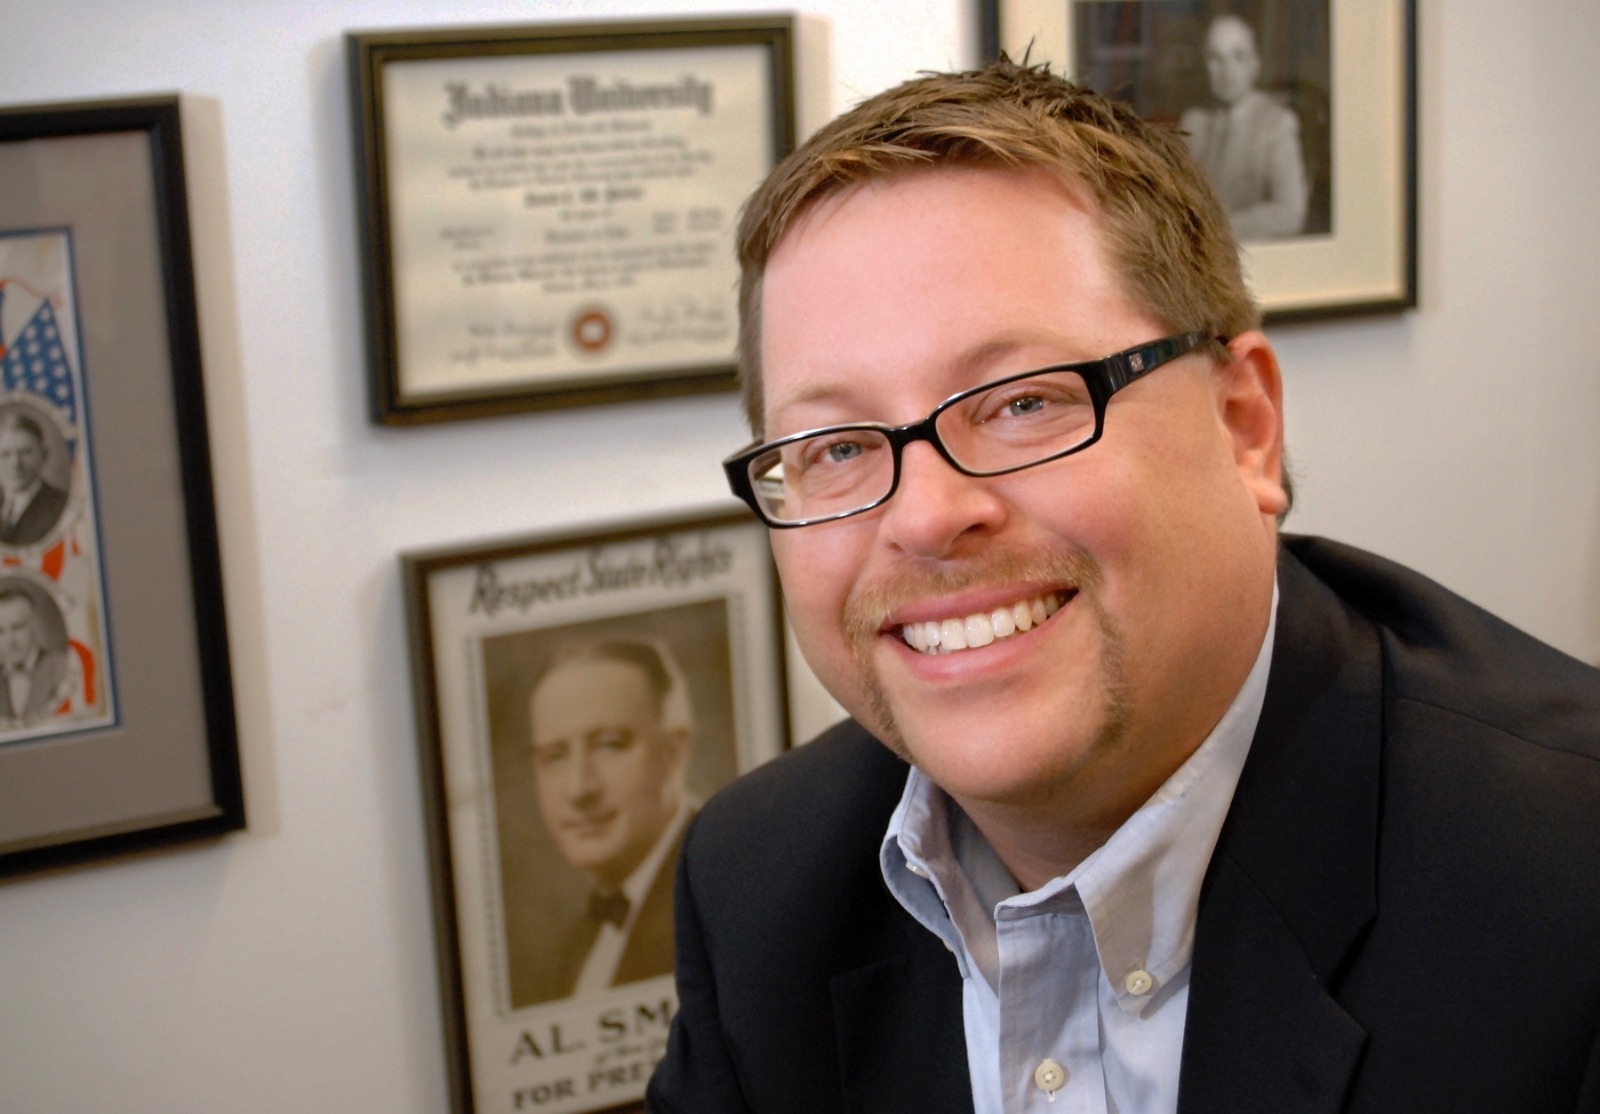 David C. Parker, professor of political science at Montana State University and author of a recent book on the race between Jon Tester and Denny Rehberg. Photo courtesy Montana State University